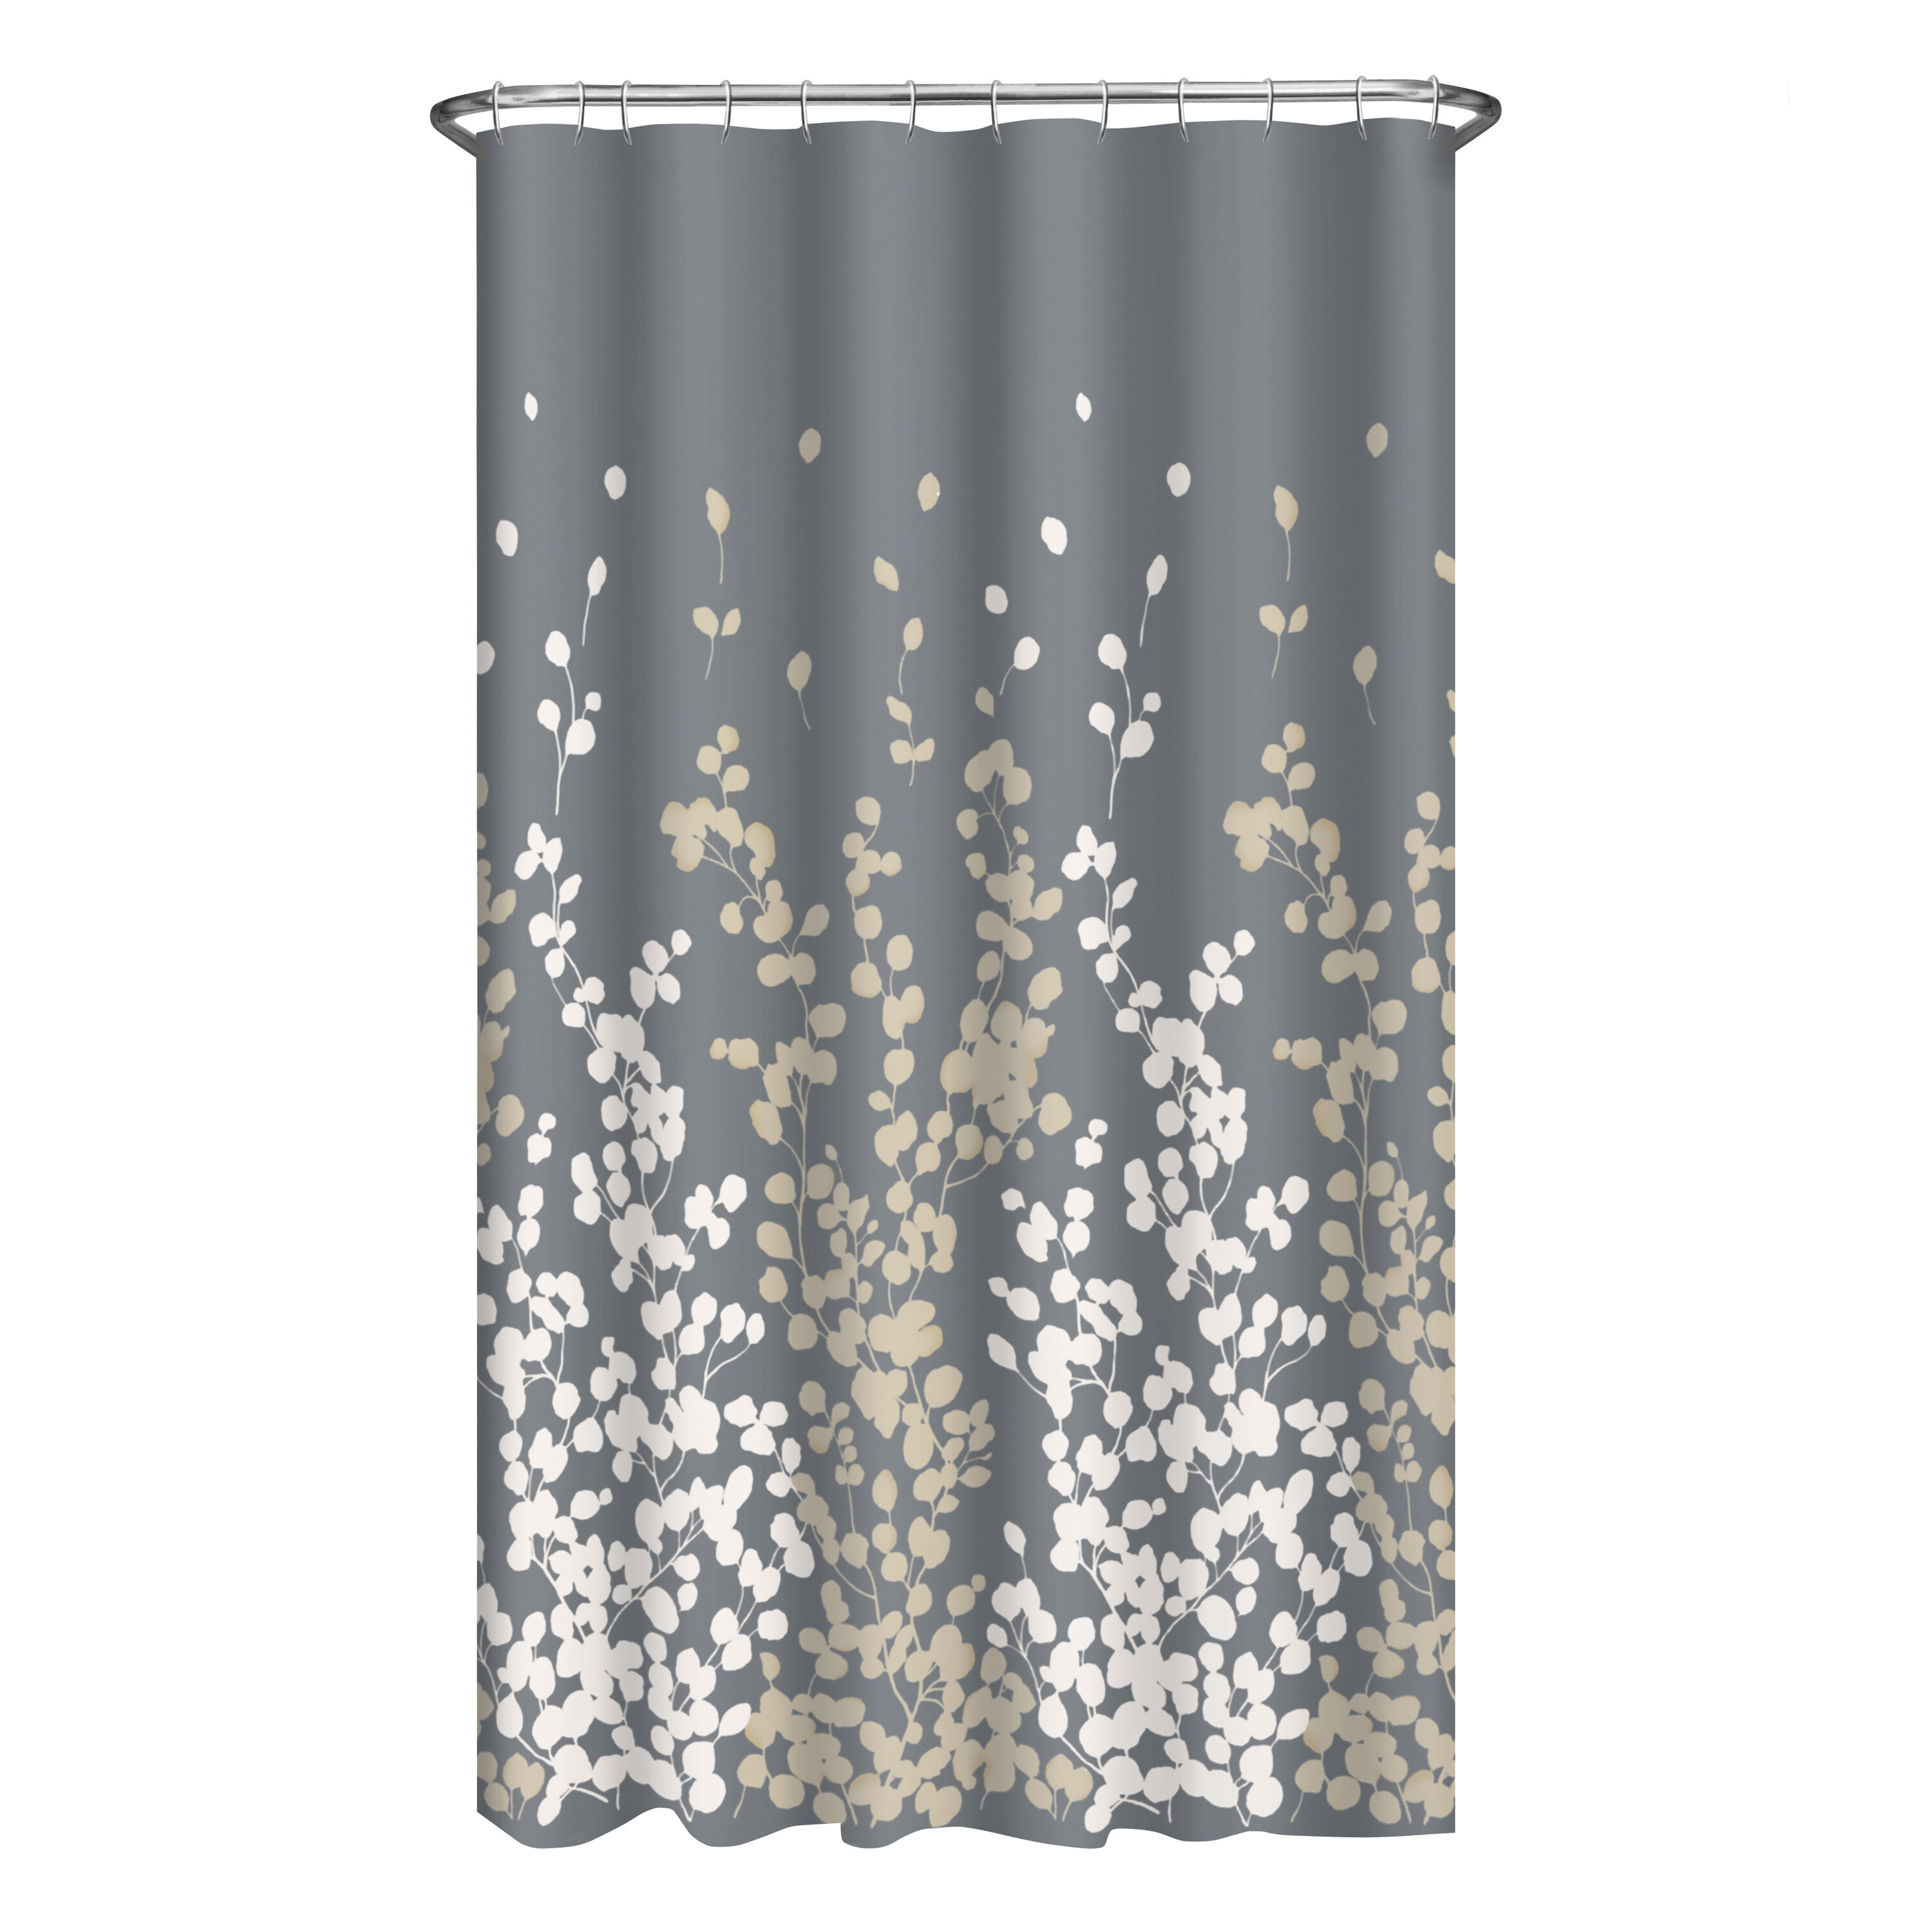 Delilah Chocolate Floral Shower Curtain W/ Hooks 